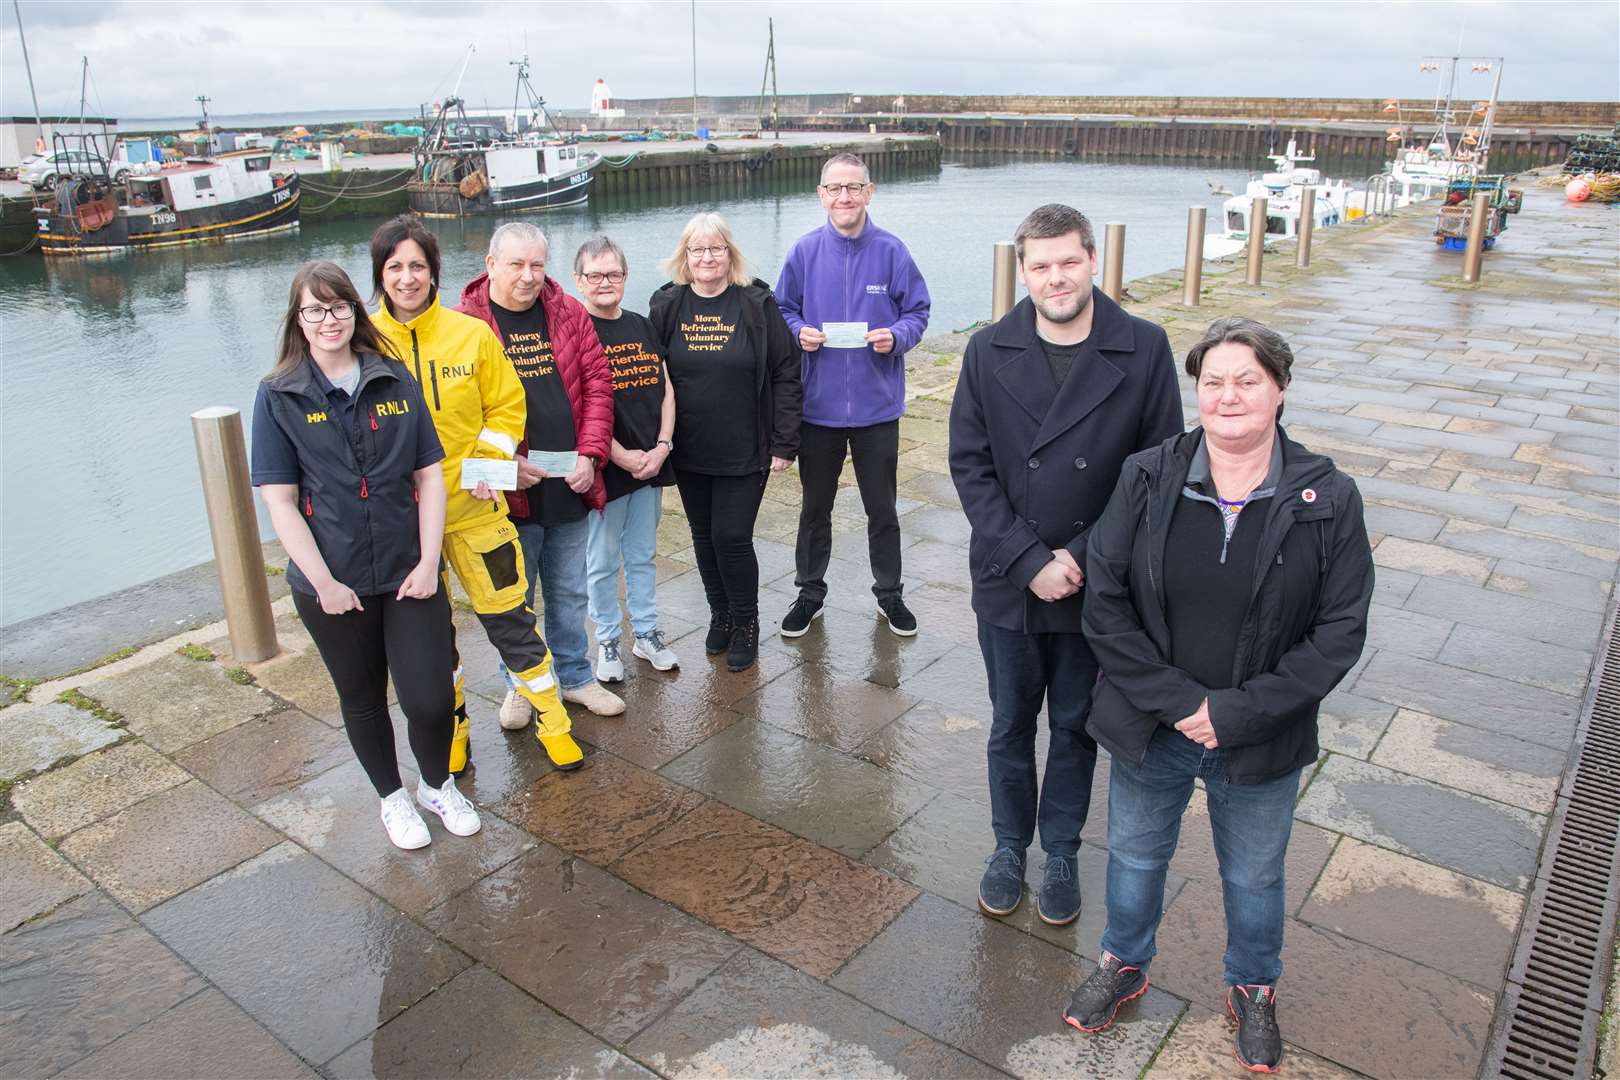 Moray Voluntary Befriending Service, Erskine Forres and Buckie RNLI are joined by Liz Davidson and Jamie Campbell from the jump. Picture: Daniel Forsyth.